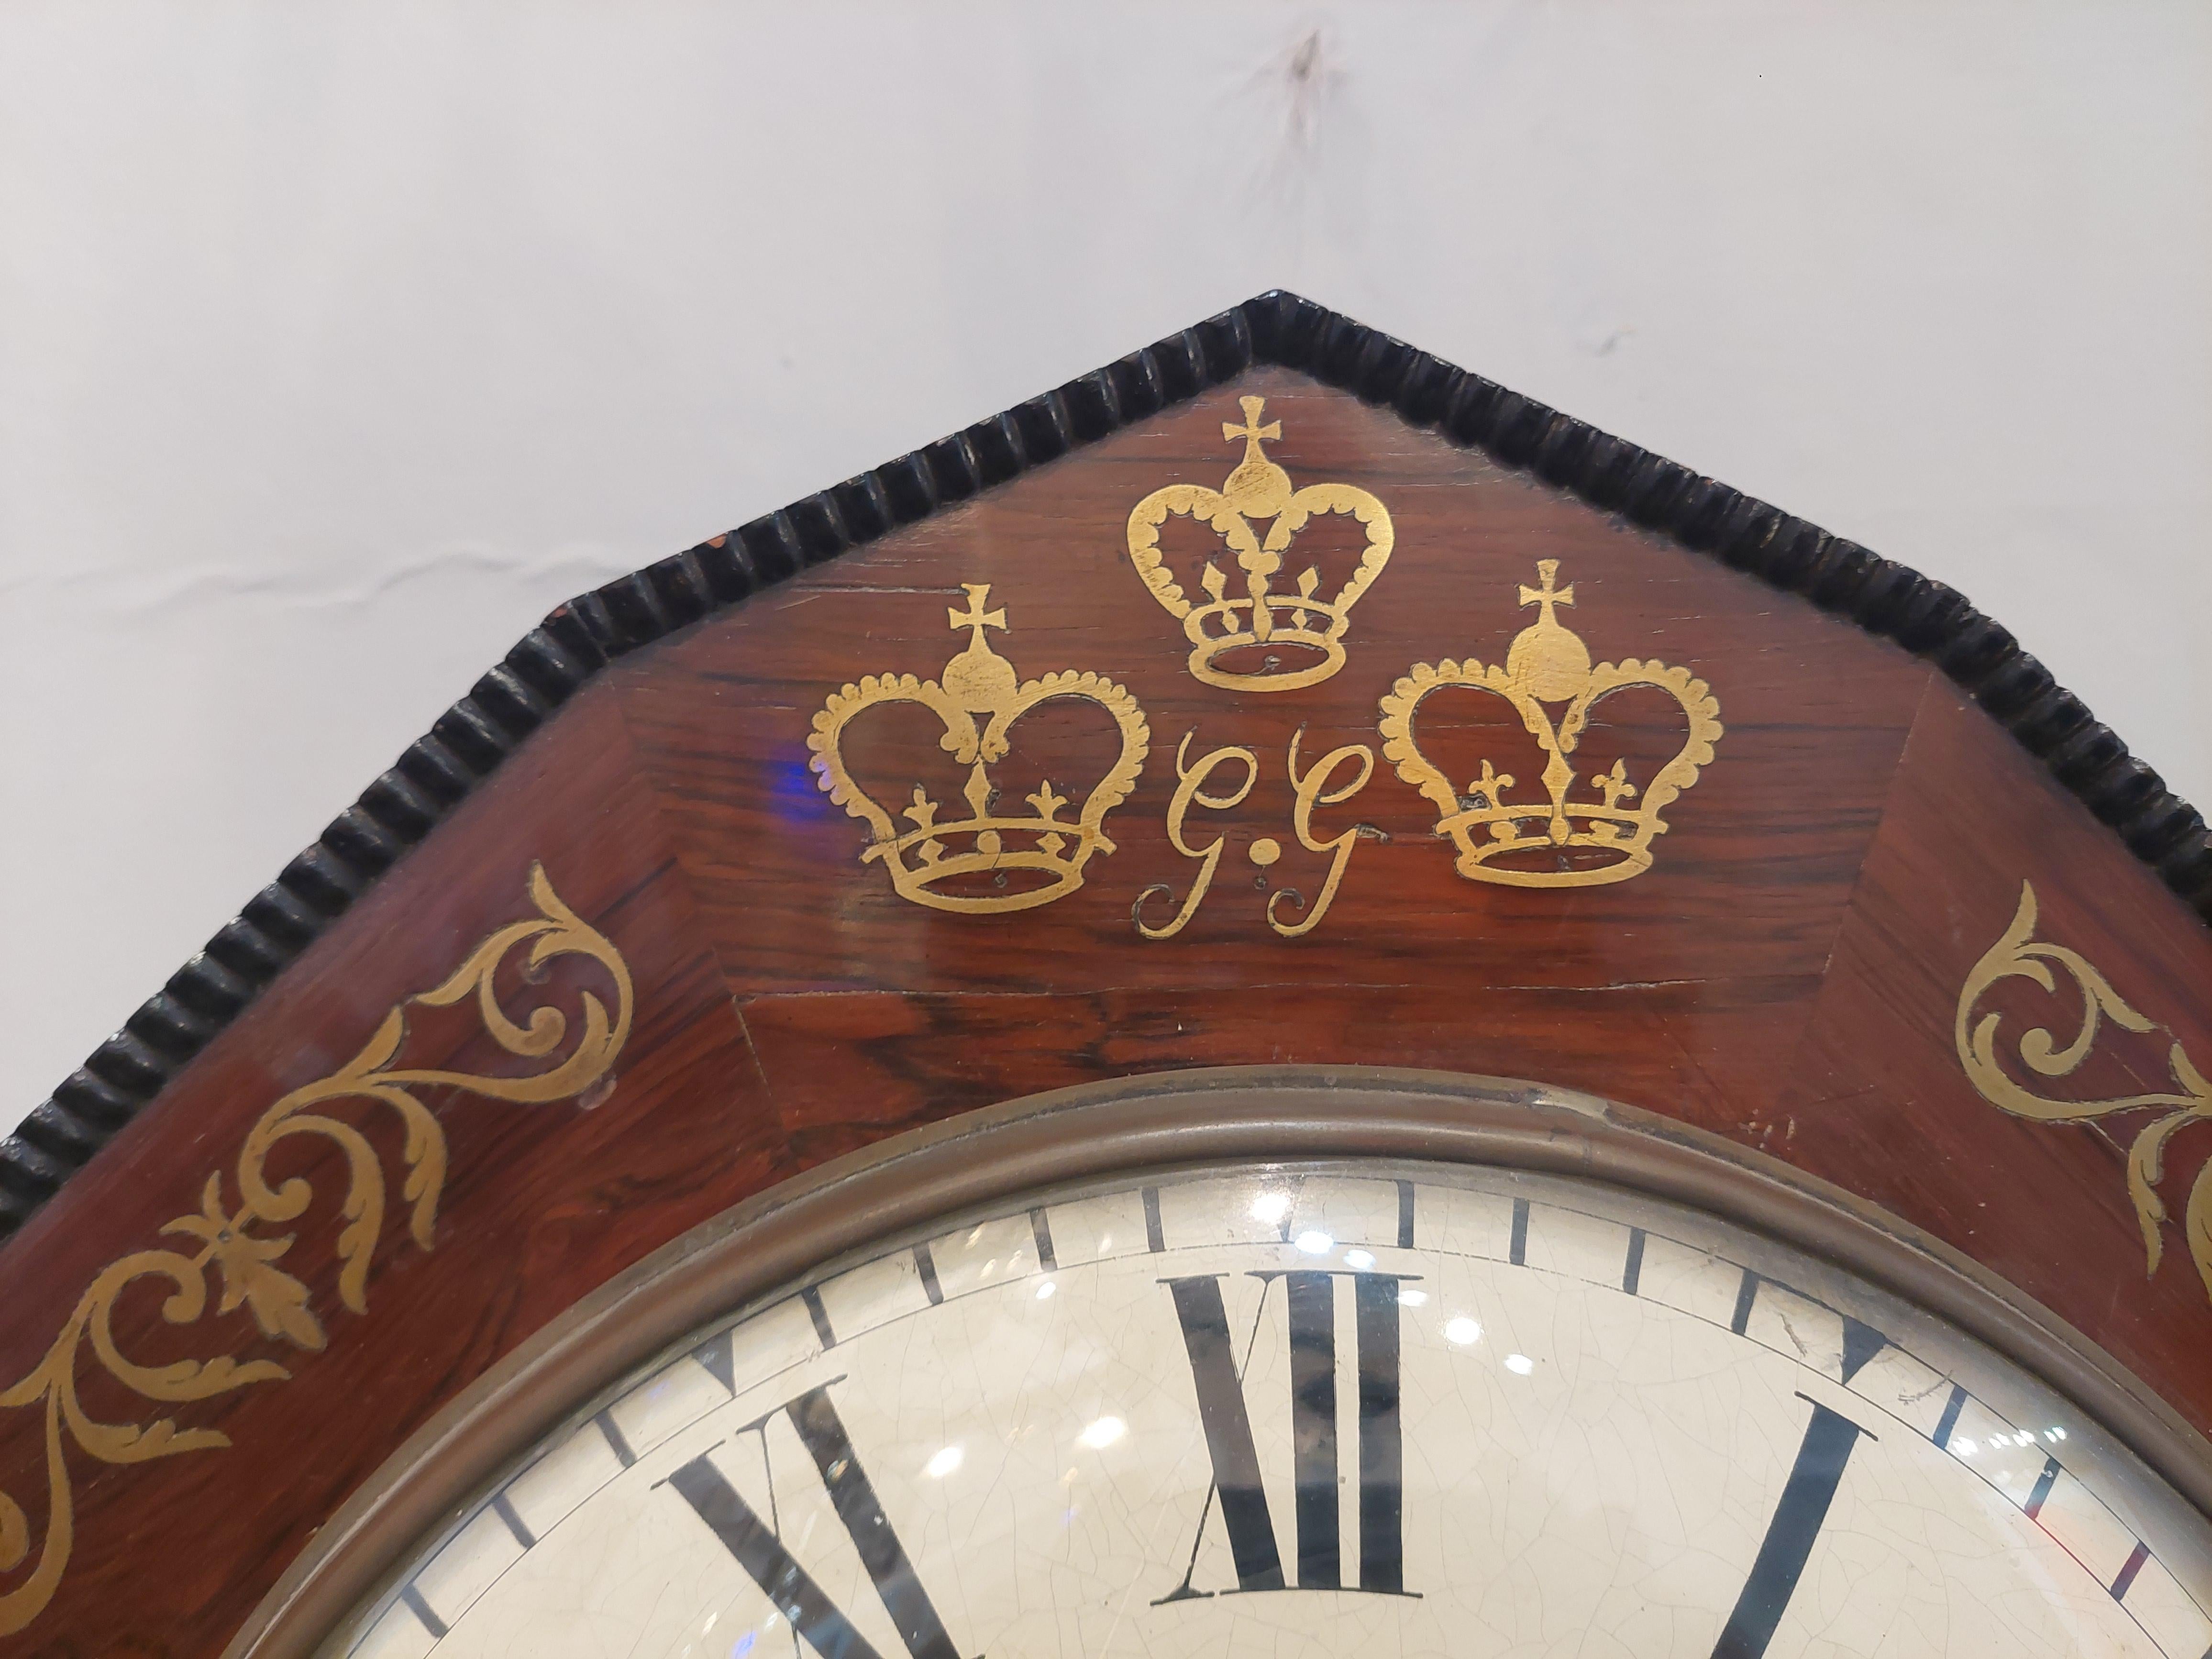 Regency Rosewood Brass Inlaid Wall Clock In Good Condition For Sale In Altrincham, GB